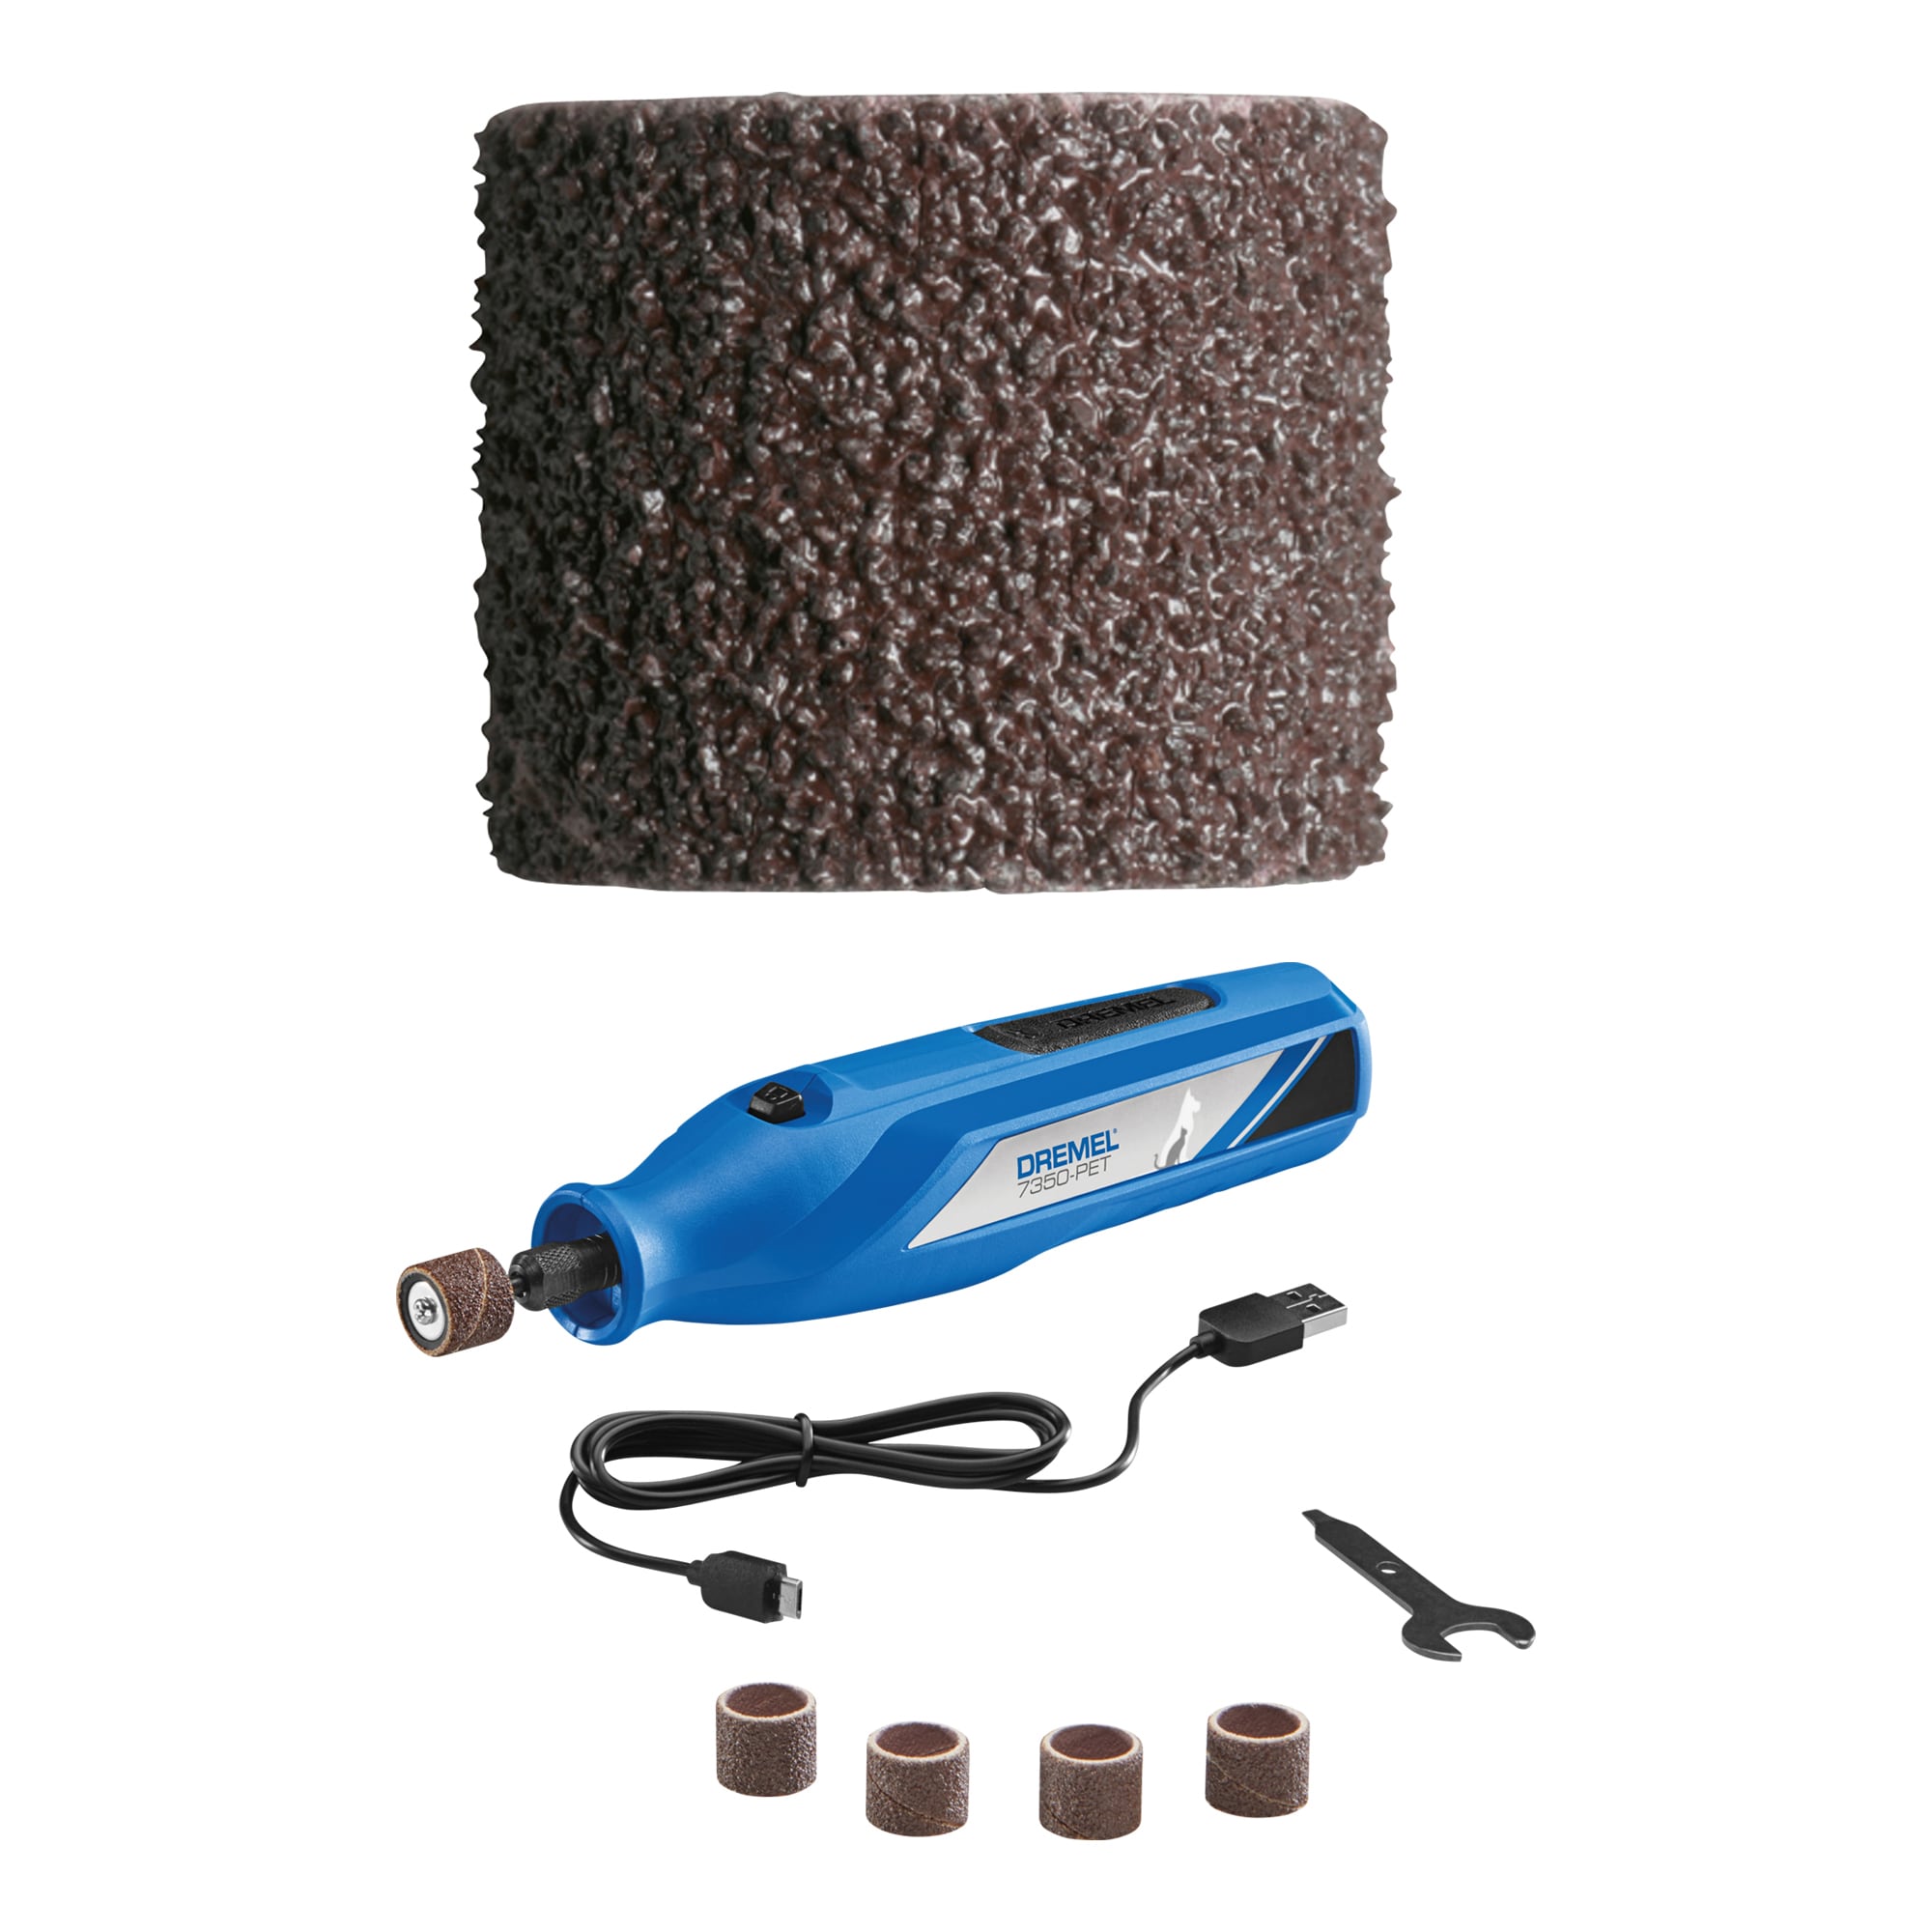 Dremel 7350 Cordless 4V Pet Grooming Rotary Tool Kit with 5 Accessories + 5 Sanding Bands